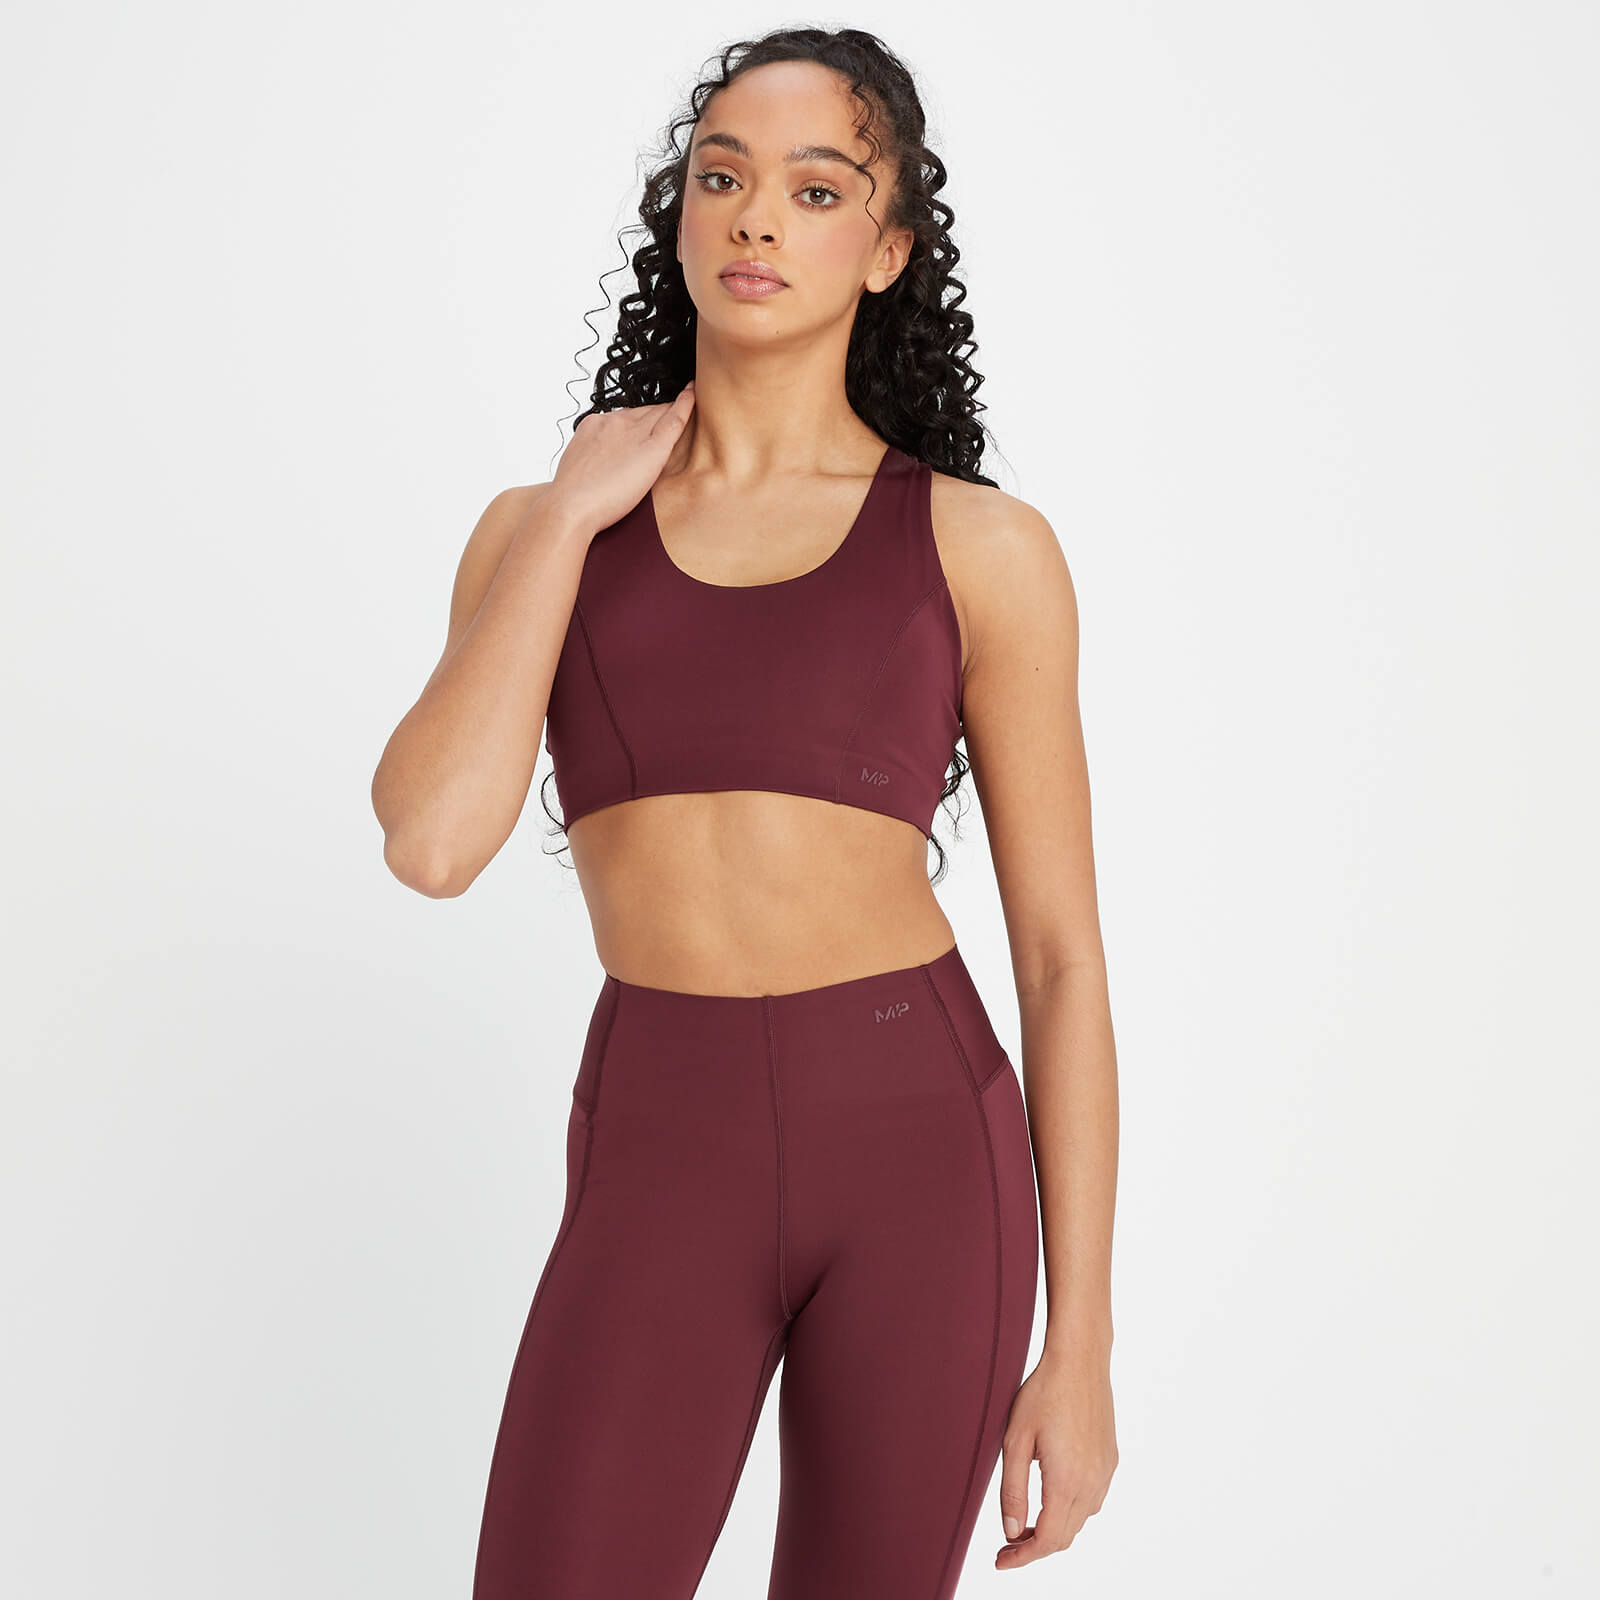 MP Women's Composure Repreve(r) Sports Bra - Washed Oxblood